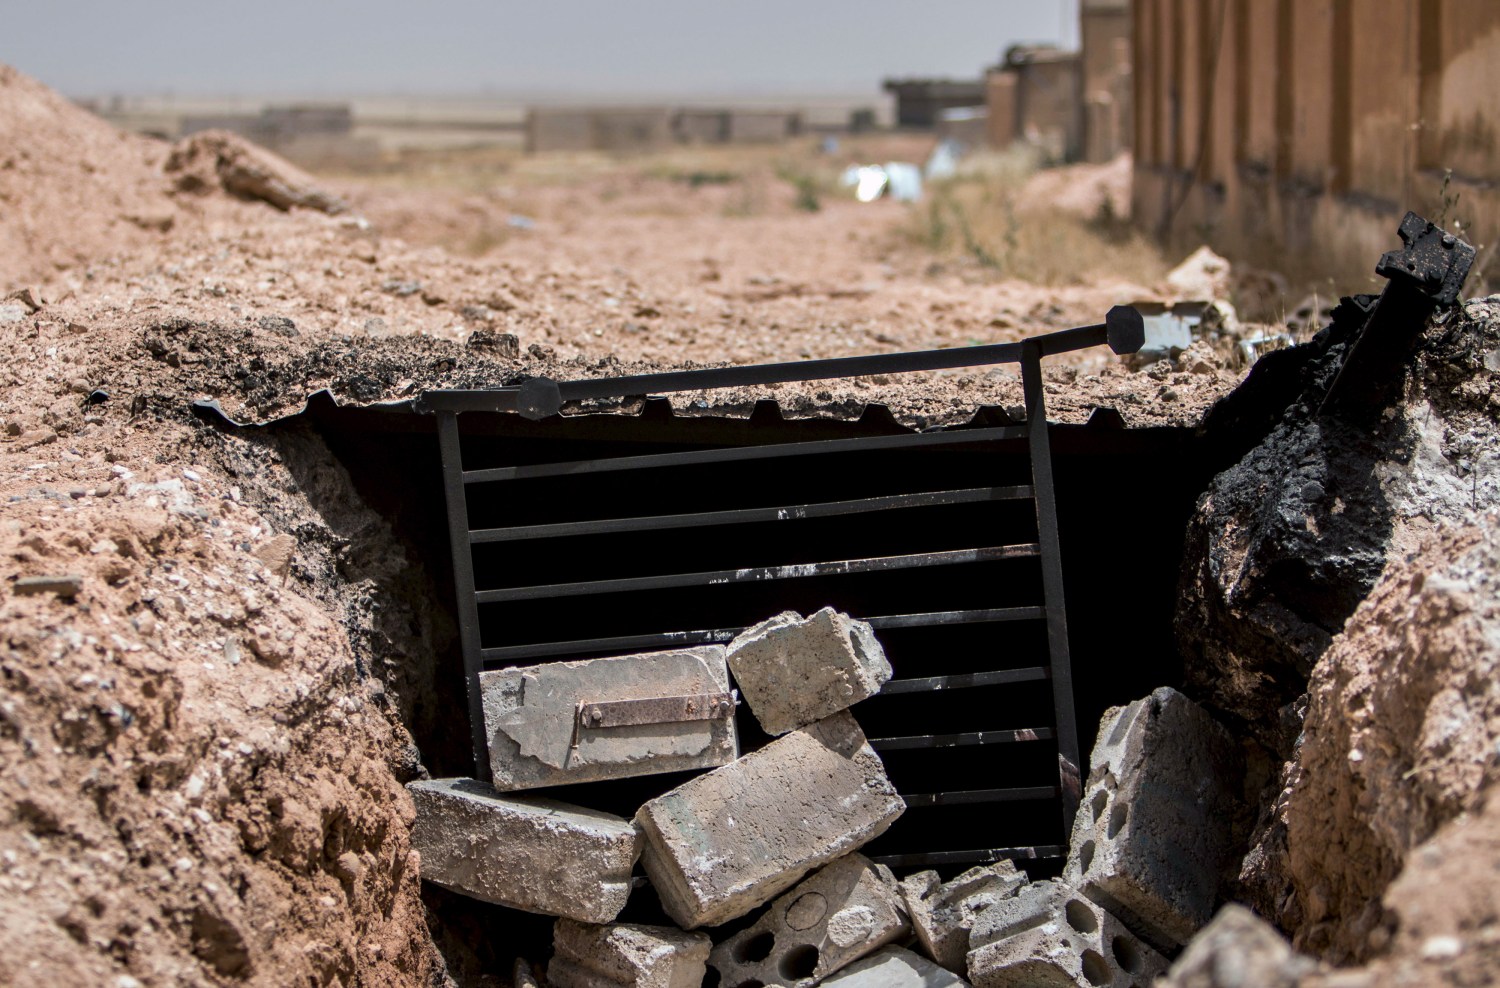 A view shows the entrance of a tunnel used by Islamic State fighters as a shelter in the town of al-Mabroukah after the Kurdish People's Protection Units (YPG) they took control of the area May 28, 2015. A Syrian Kurdish militia has captured a town from Islamic State in the northeast, a group monitoring the war reported on Wednesday, compounding recent losses for the jihadists in a strategic corner of Syria. The capture of the town of al-Mabroukah by the YPG militia opens the road for its forces to advance towards the Islamic State's stronghold in Raqqa province, the Syrian Observatory for Human Rights reported. REUTERS/Rodi Said - GF10000110254